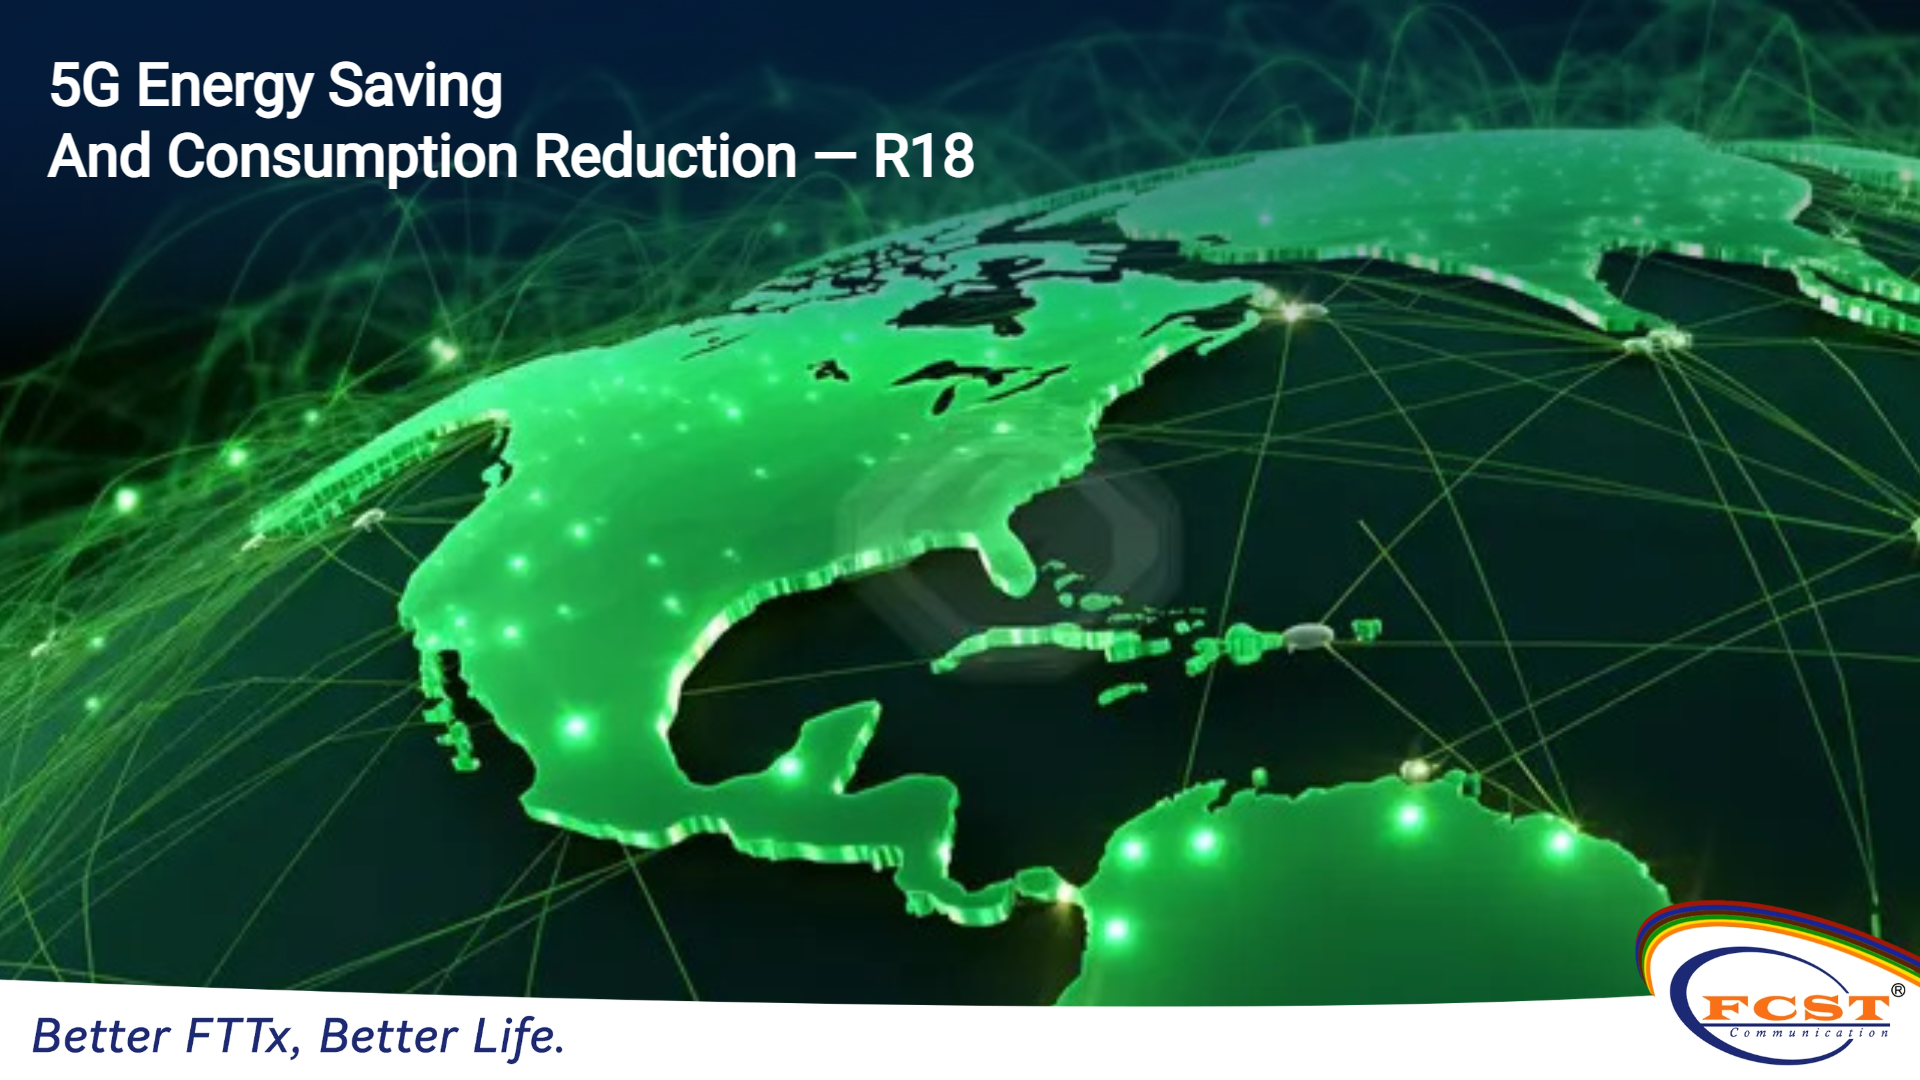 5G Energy Saving And Consumption Reduction—R18